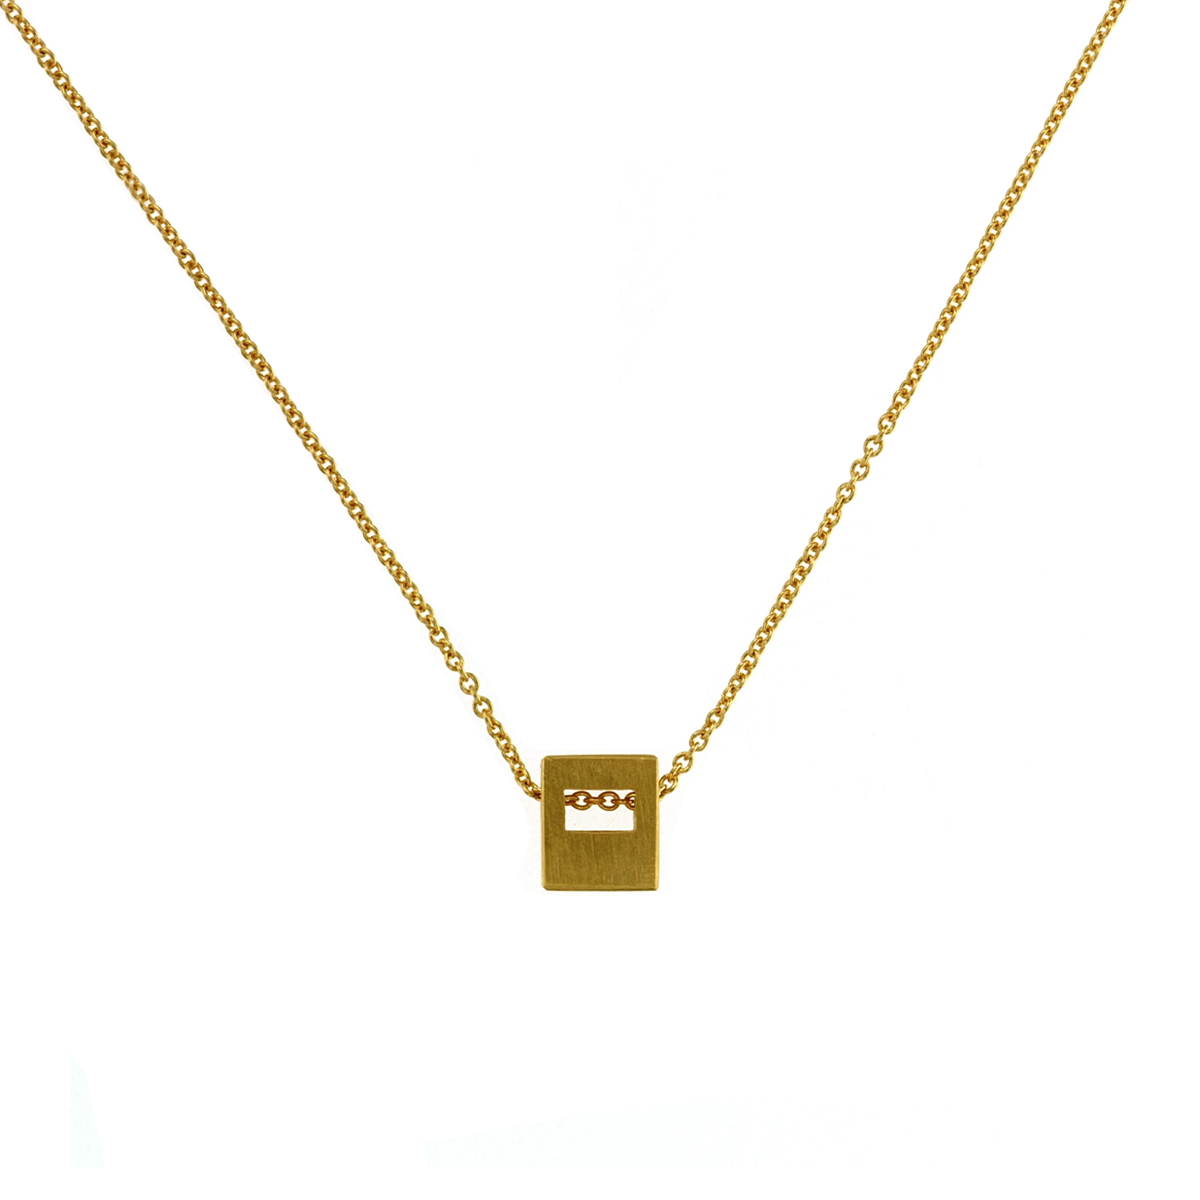 Gold Plated Sterling Silver Square Cutout Pendant with Chain